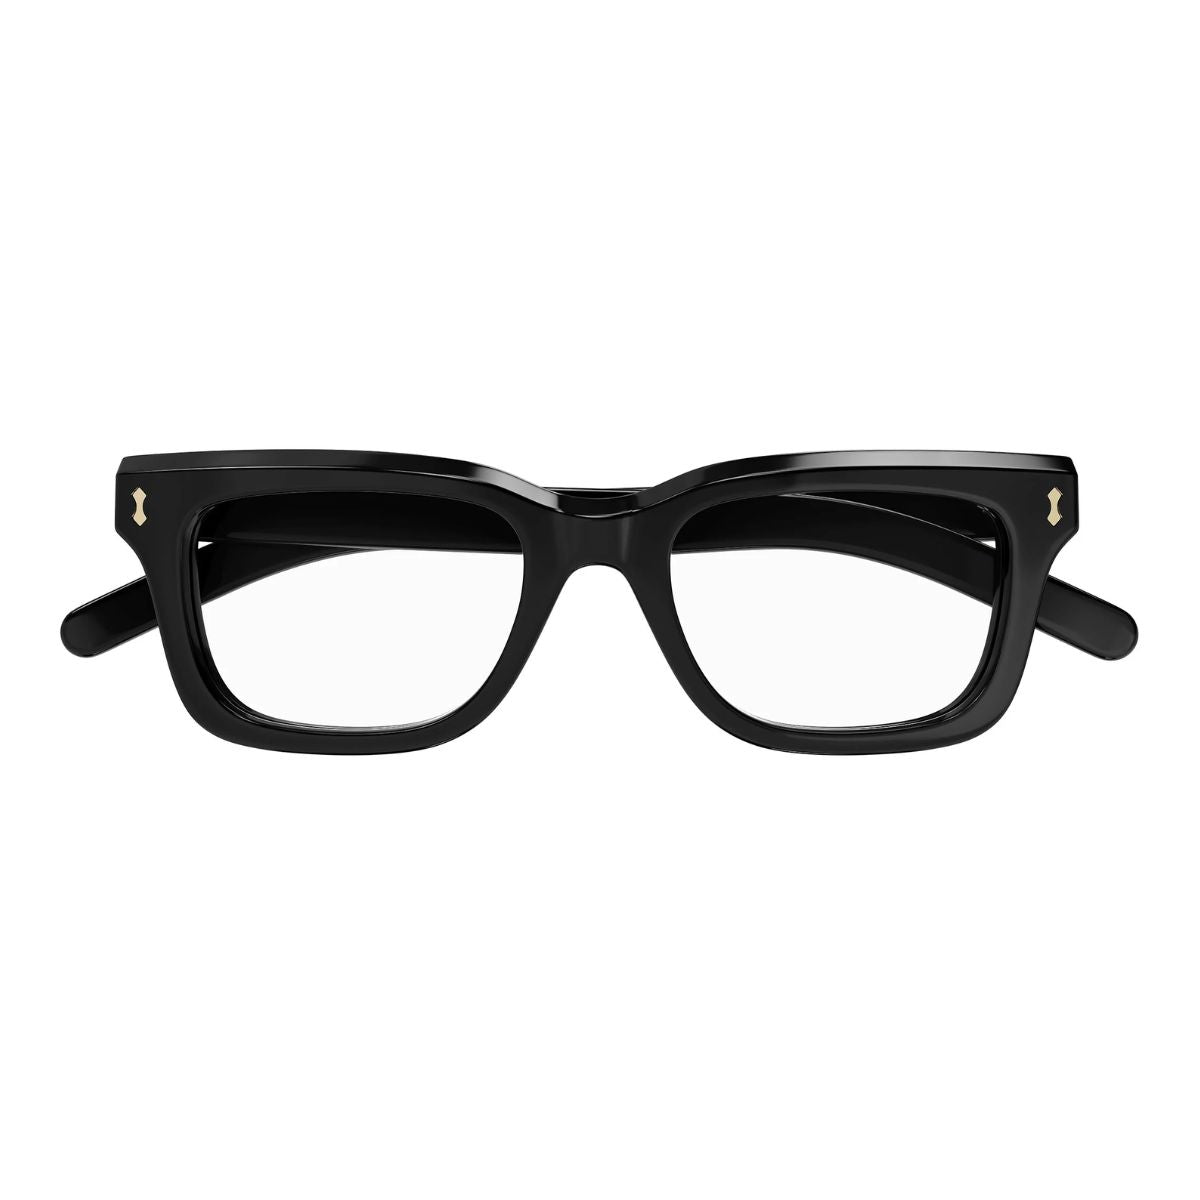 "Gucci 1522O 001 Eyeglasses - A perfect mix of fashion and practicality, designed for the fashion-forward man."